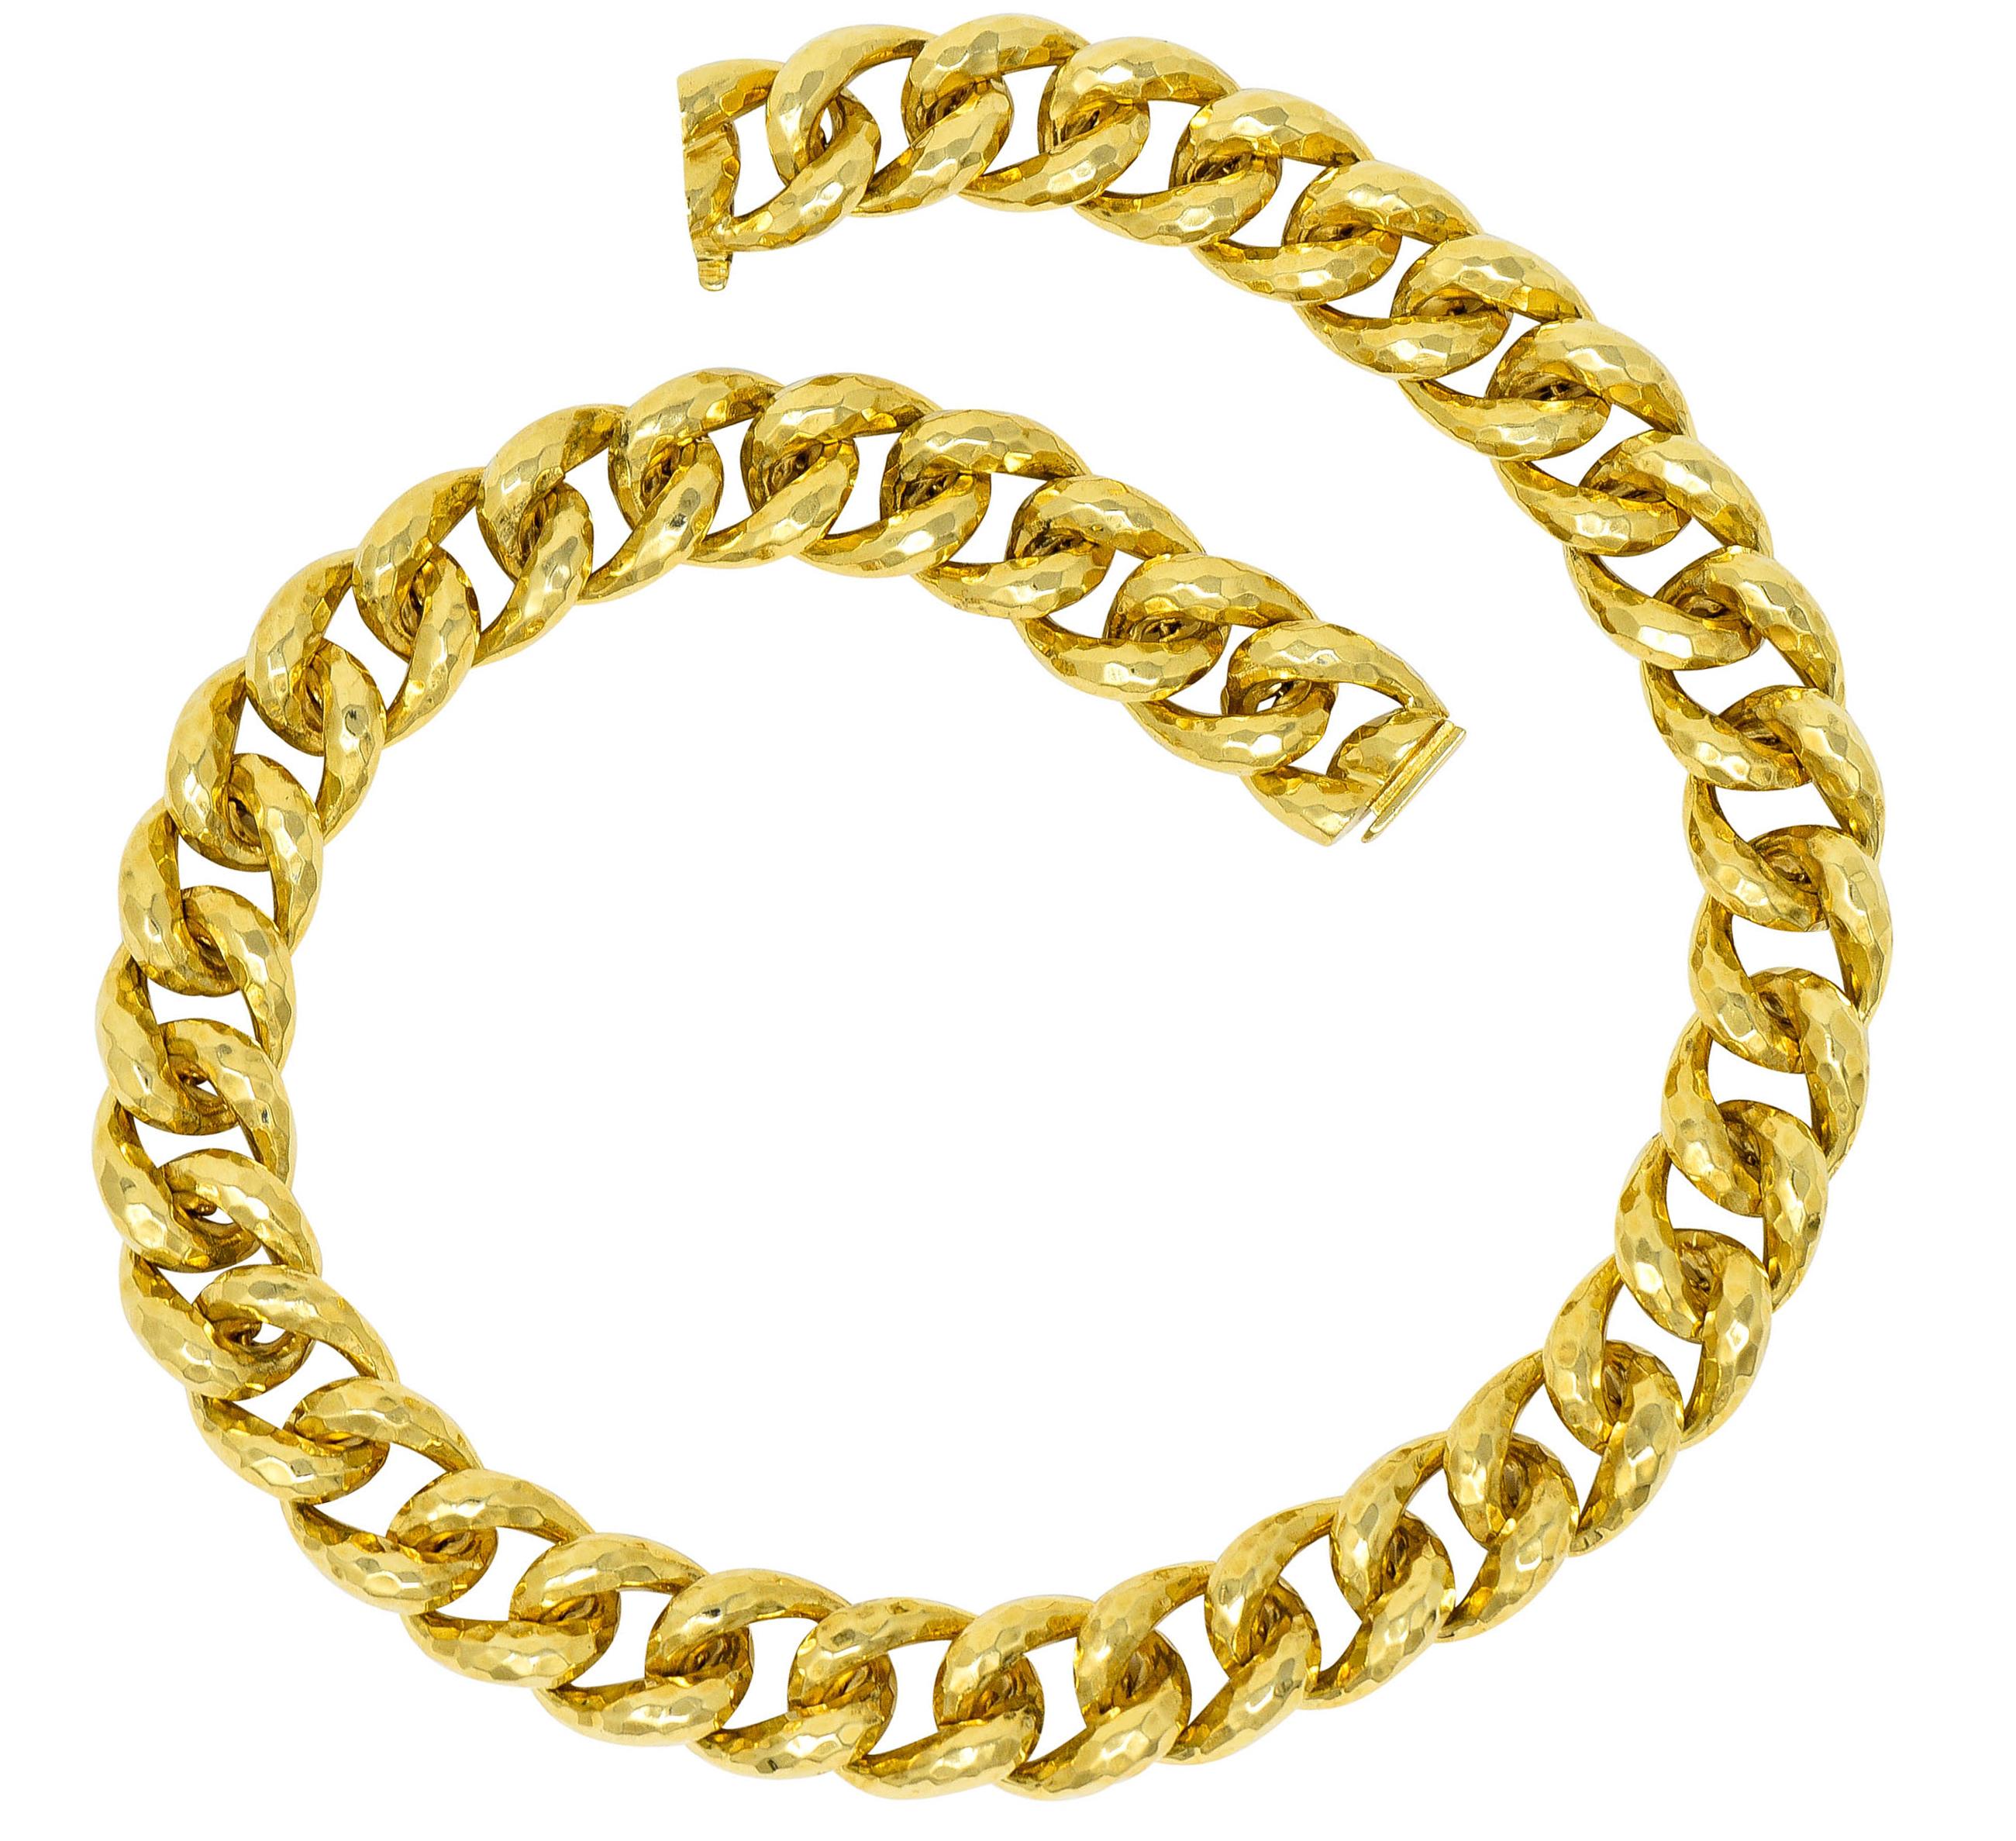 Designed as a chain necklace with substantial curbed links

Featuring a brightly polished hammered finish

Completed by a concealed clasp with a fold over safety

Stamped 18K and 750 for 18 karat gold

Fully signed Henry Dunay with maker's